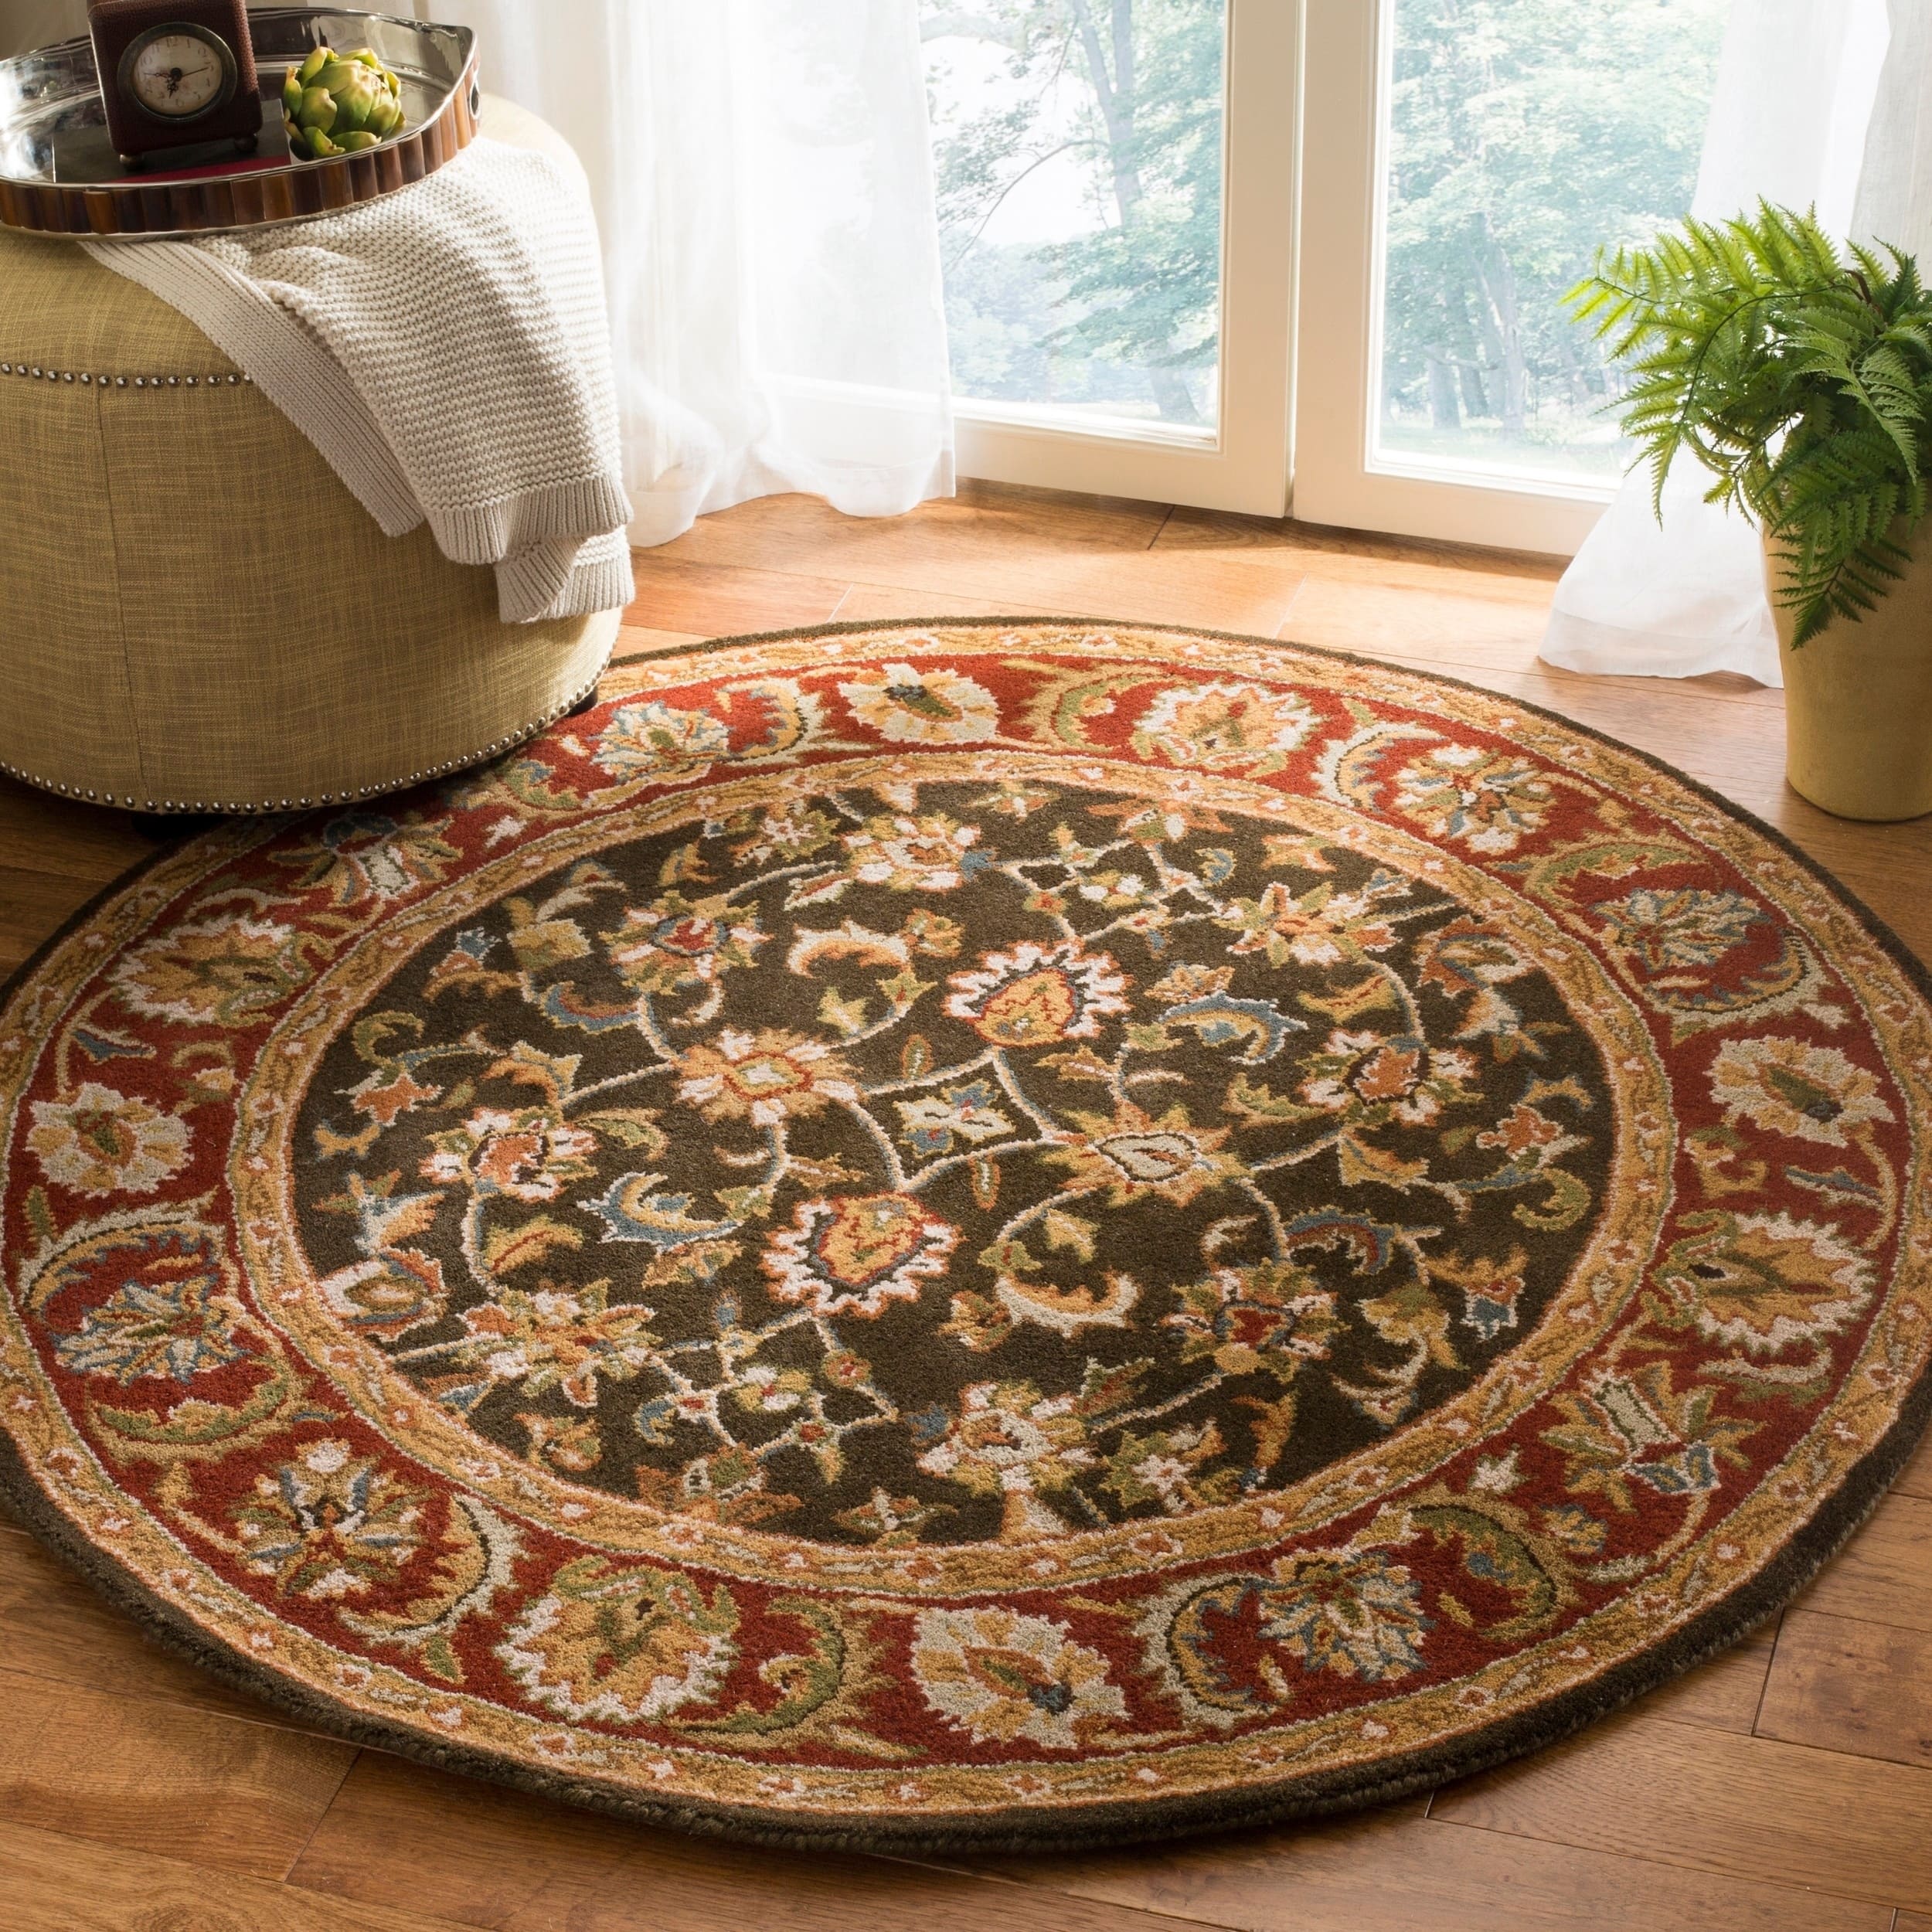 Buy Round, Oval & Square Area Rugs Online at Overstock.com | Our Best